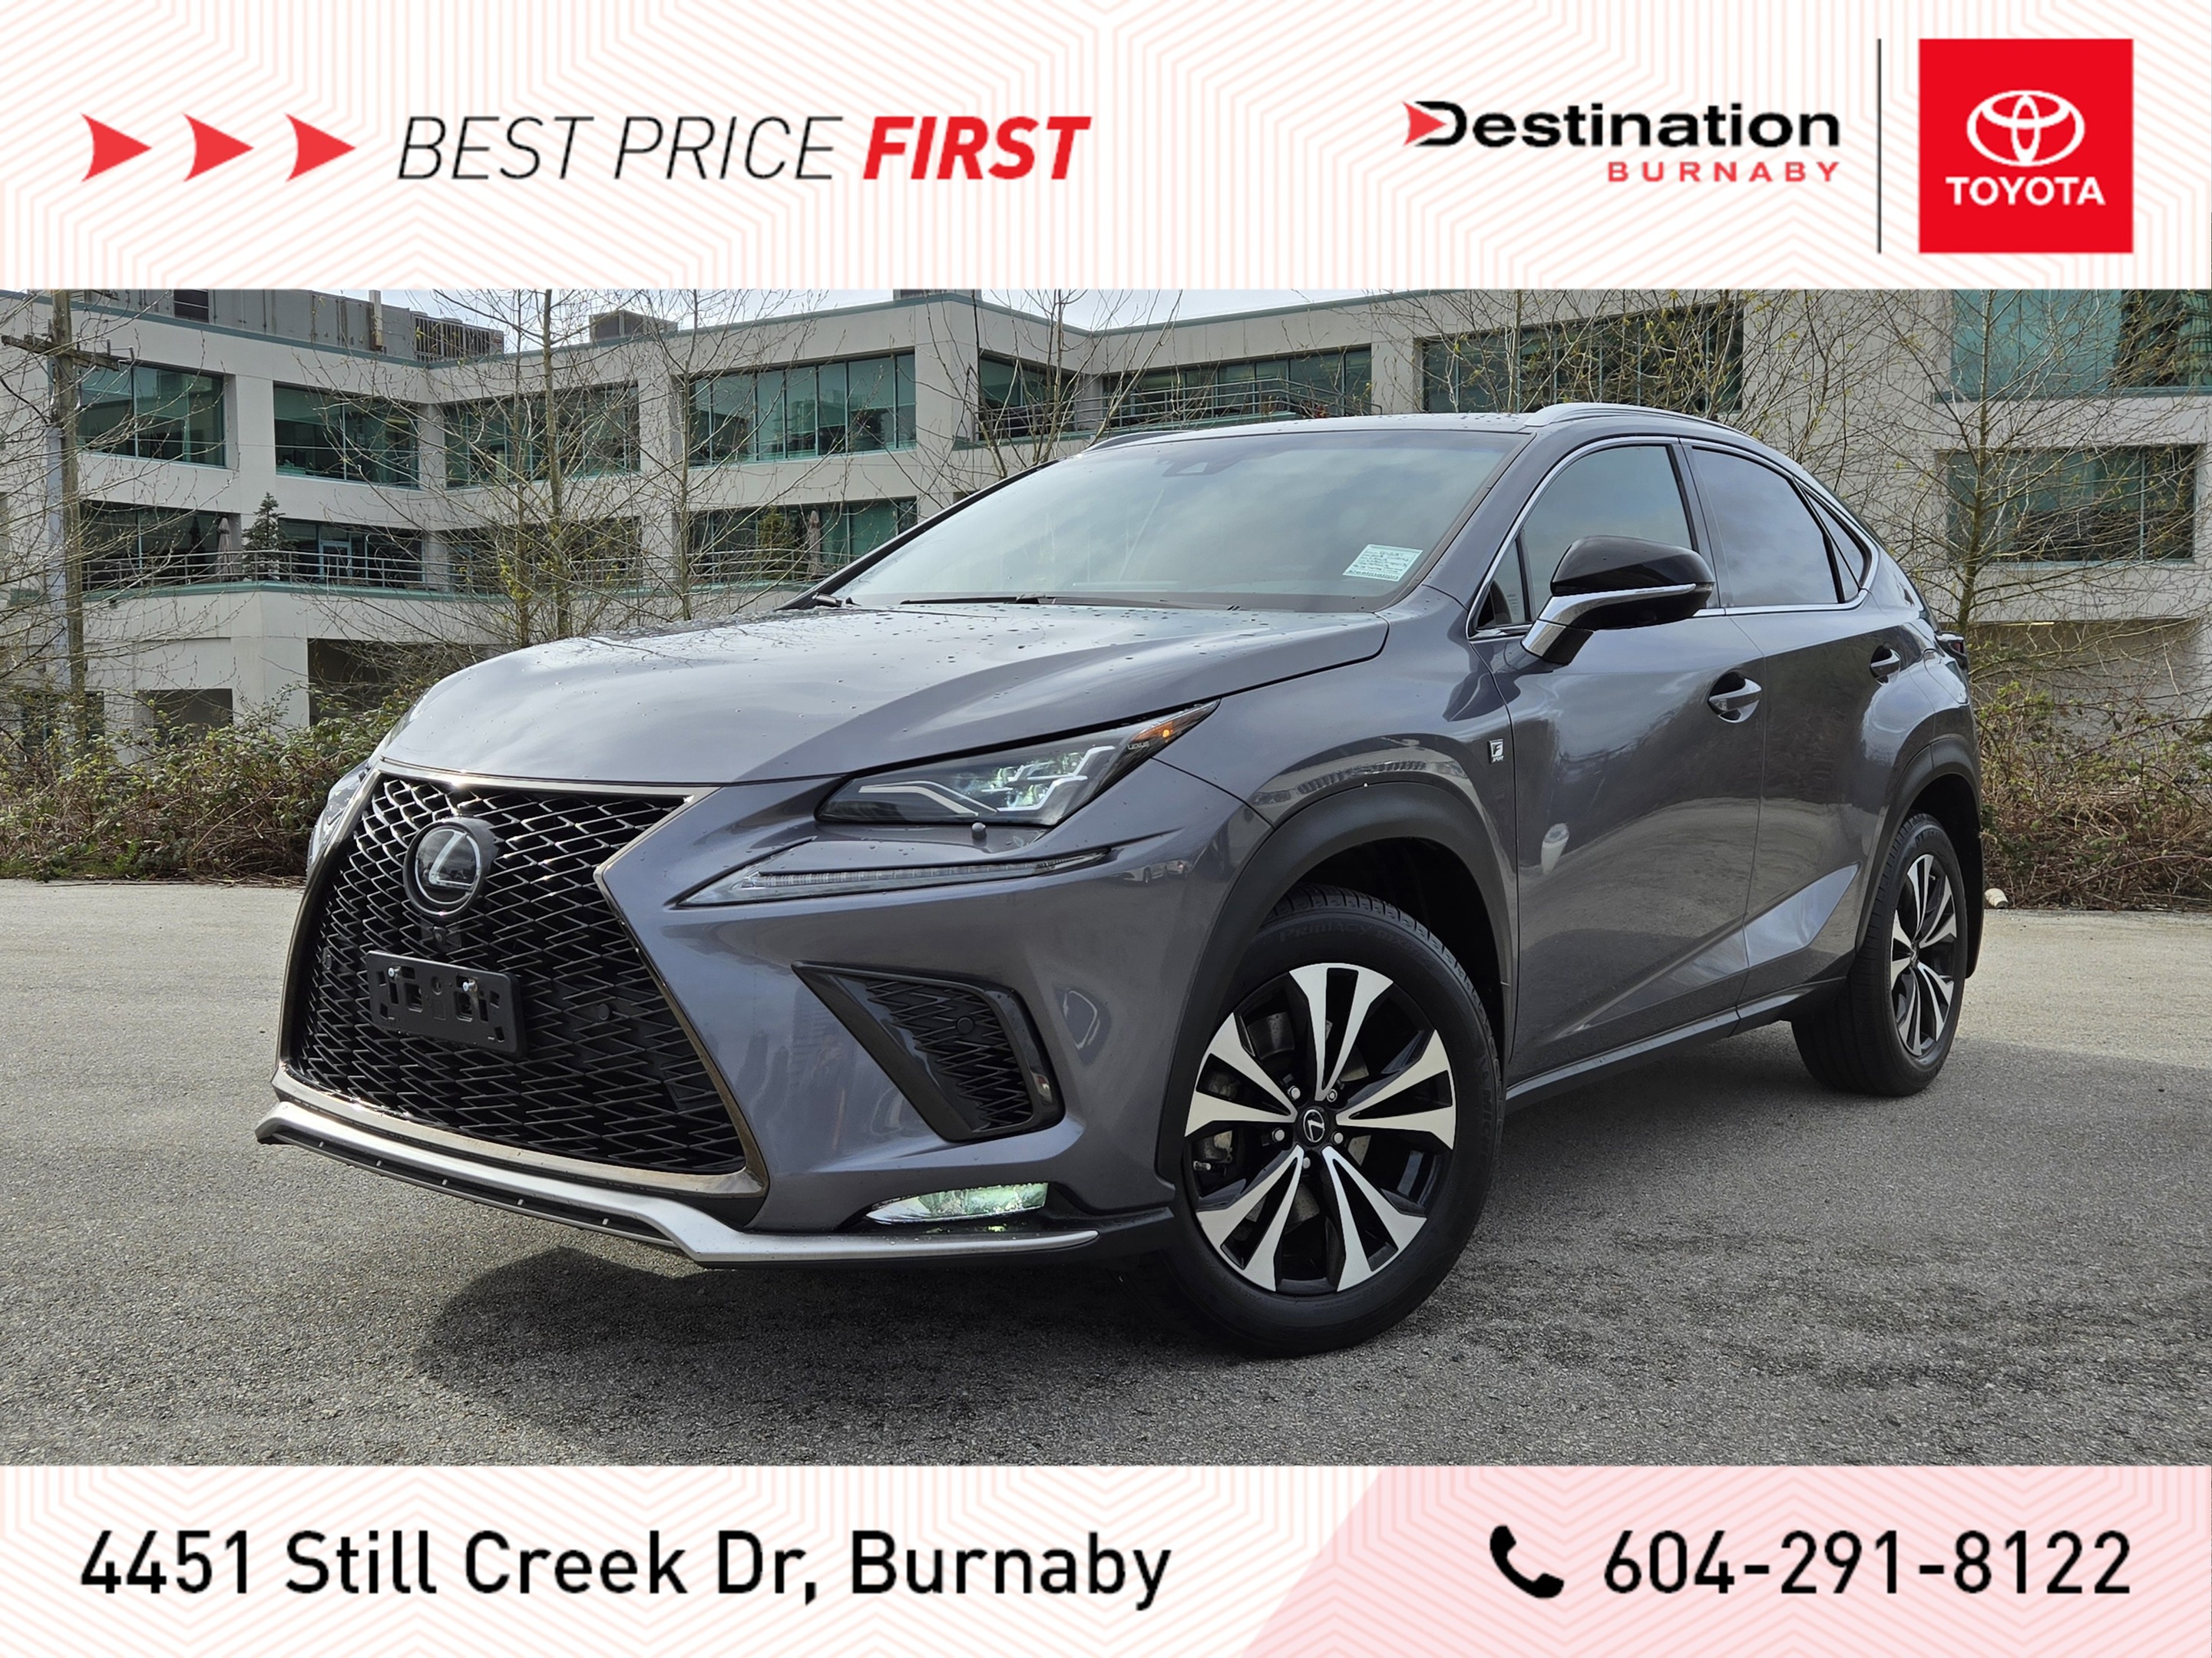 2018 Lexus NX 300 F-Sport 3 AWD - Local, No Accidents, Fully Loaded!